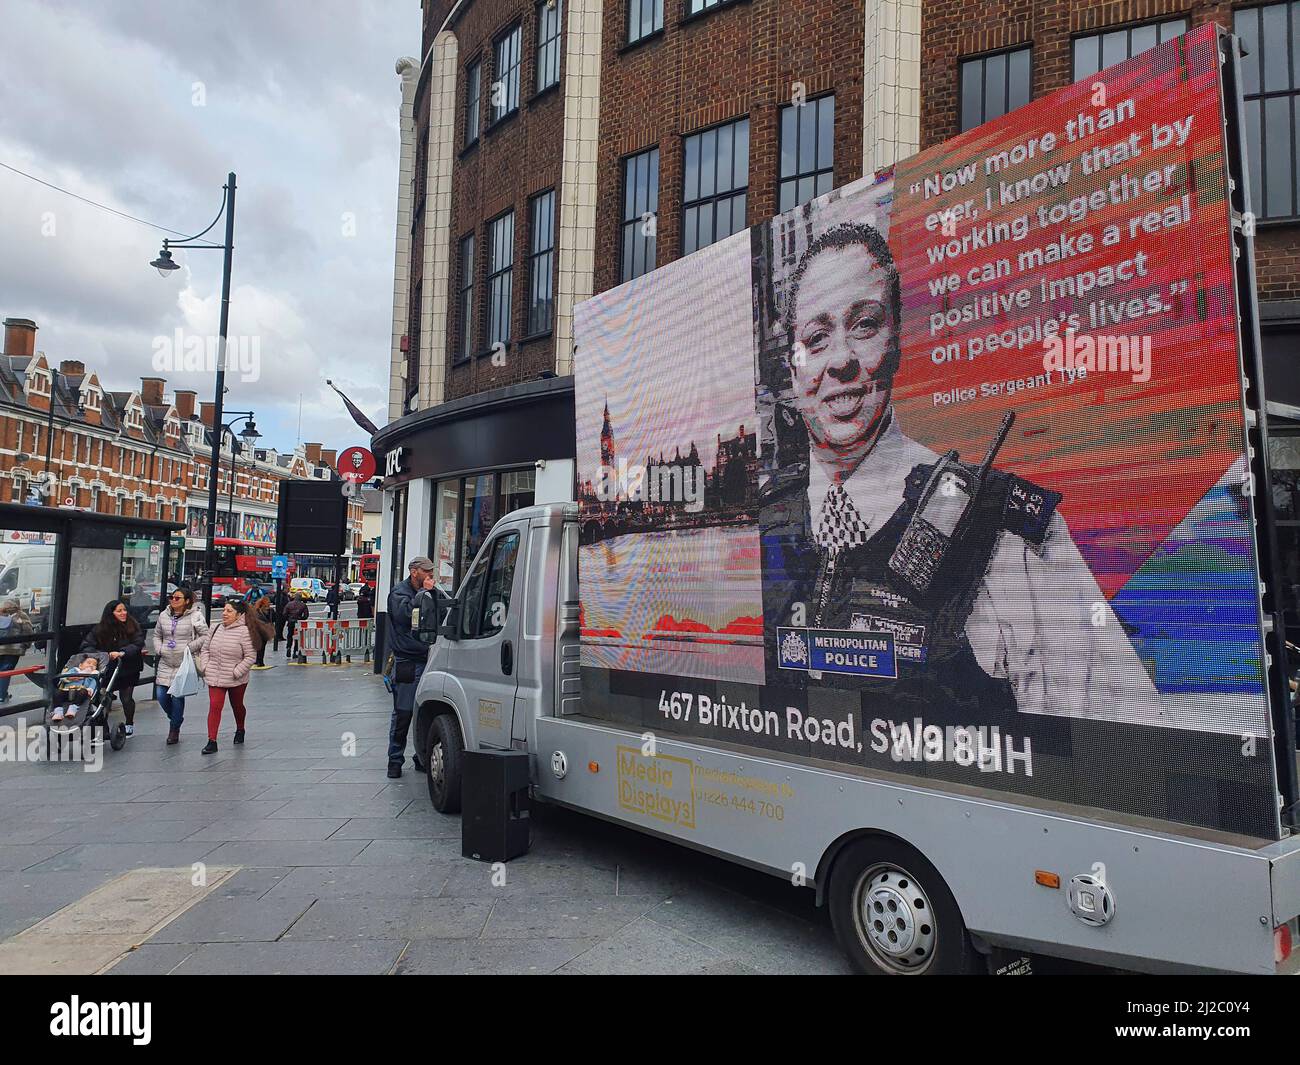 Brixton, UK, 31 March 2022: London's Metropolitan Police are trying to recruit new officers representing a more diverse range of ethnicities, genders and sexualities. Several recent scandals have highlighted the problems of racism, homophobia and misogyny within the police force and the Met's recruitment drive includes this advertising van in central Brixton with an LED screen and speakers broadcasting that 'now more than ever' new recruits are needed to improve diversity, inclusion and representation within London's police. Anna Watson/Alamy Live News Stock Photo